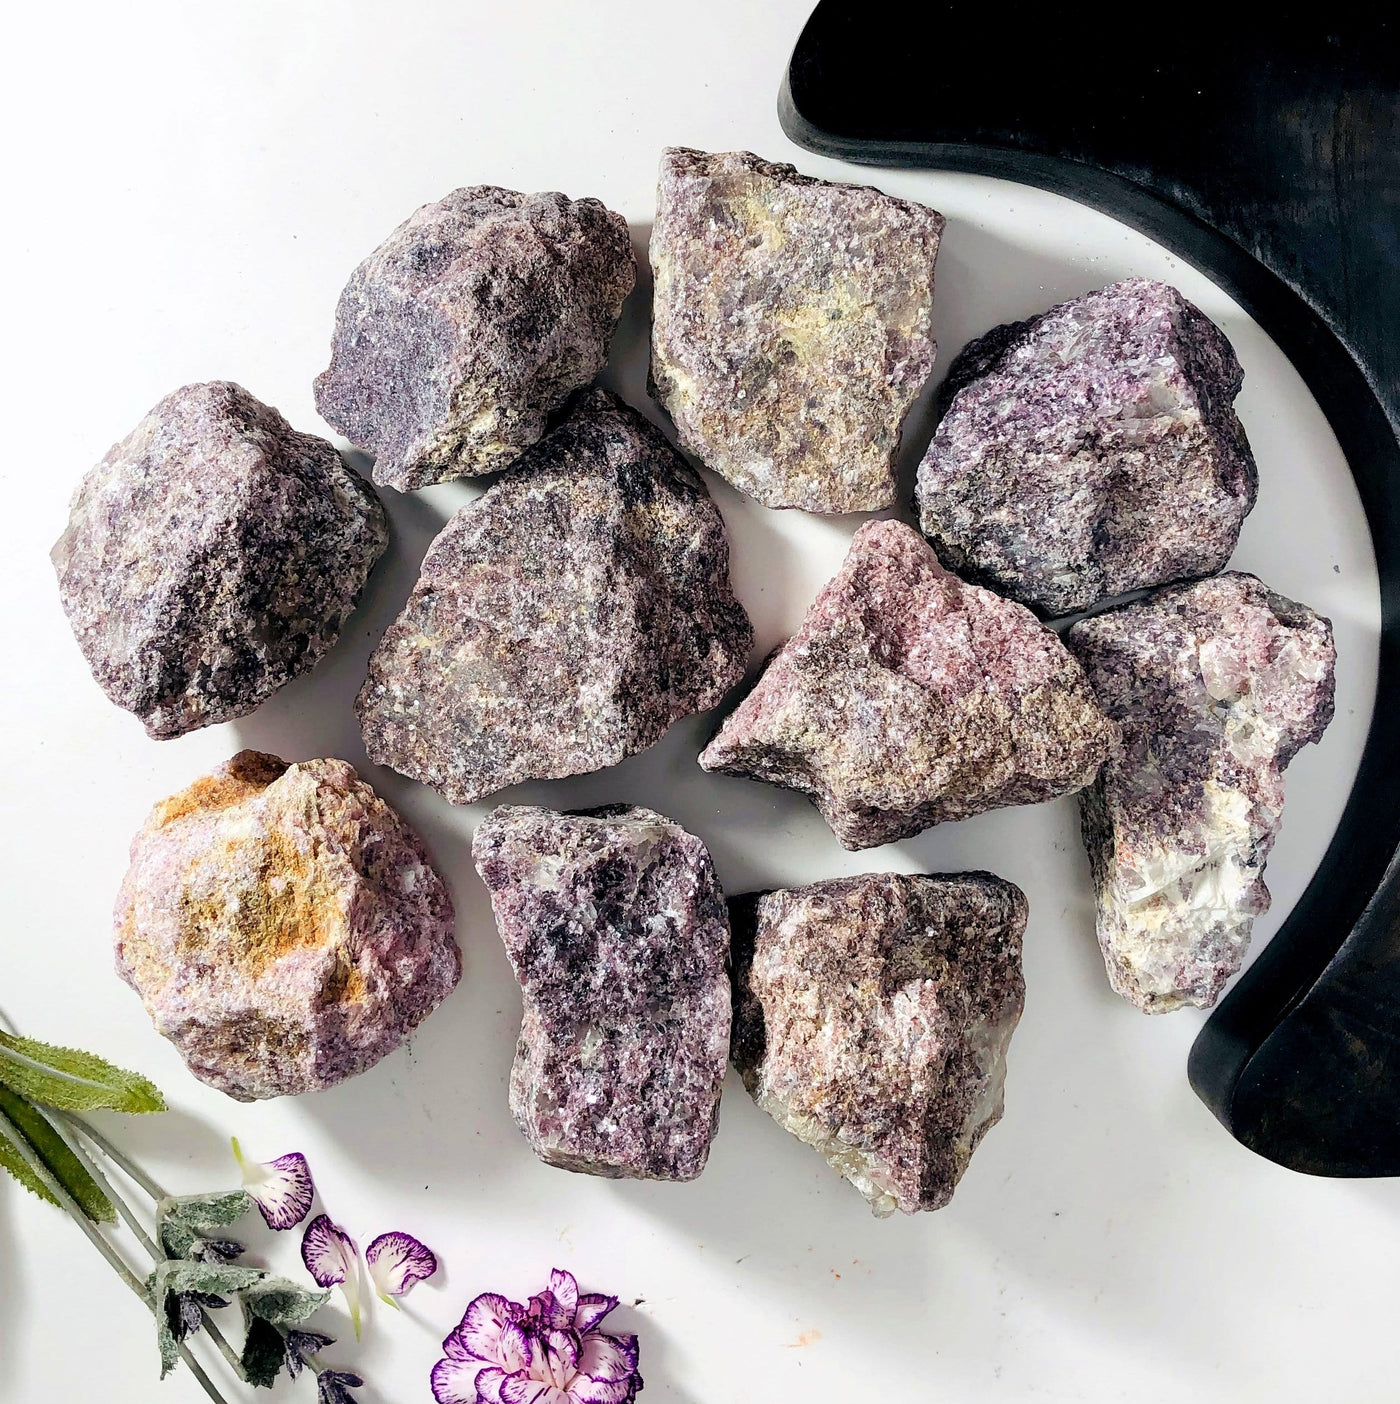 large Lepidolite Rough Stones displayed in various sizes colors texture shape